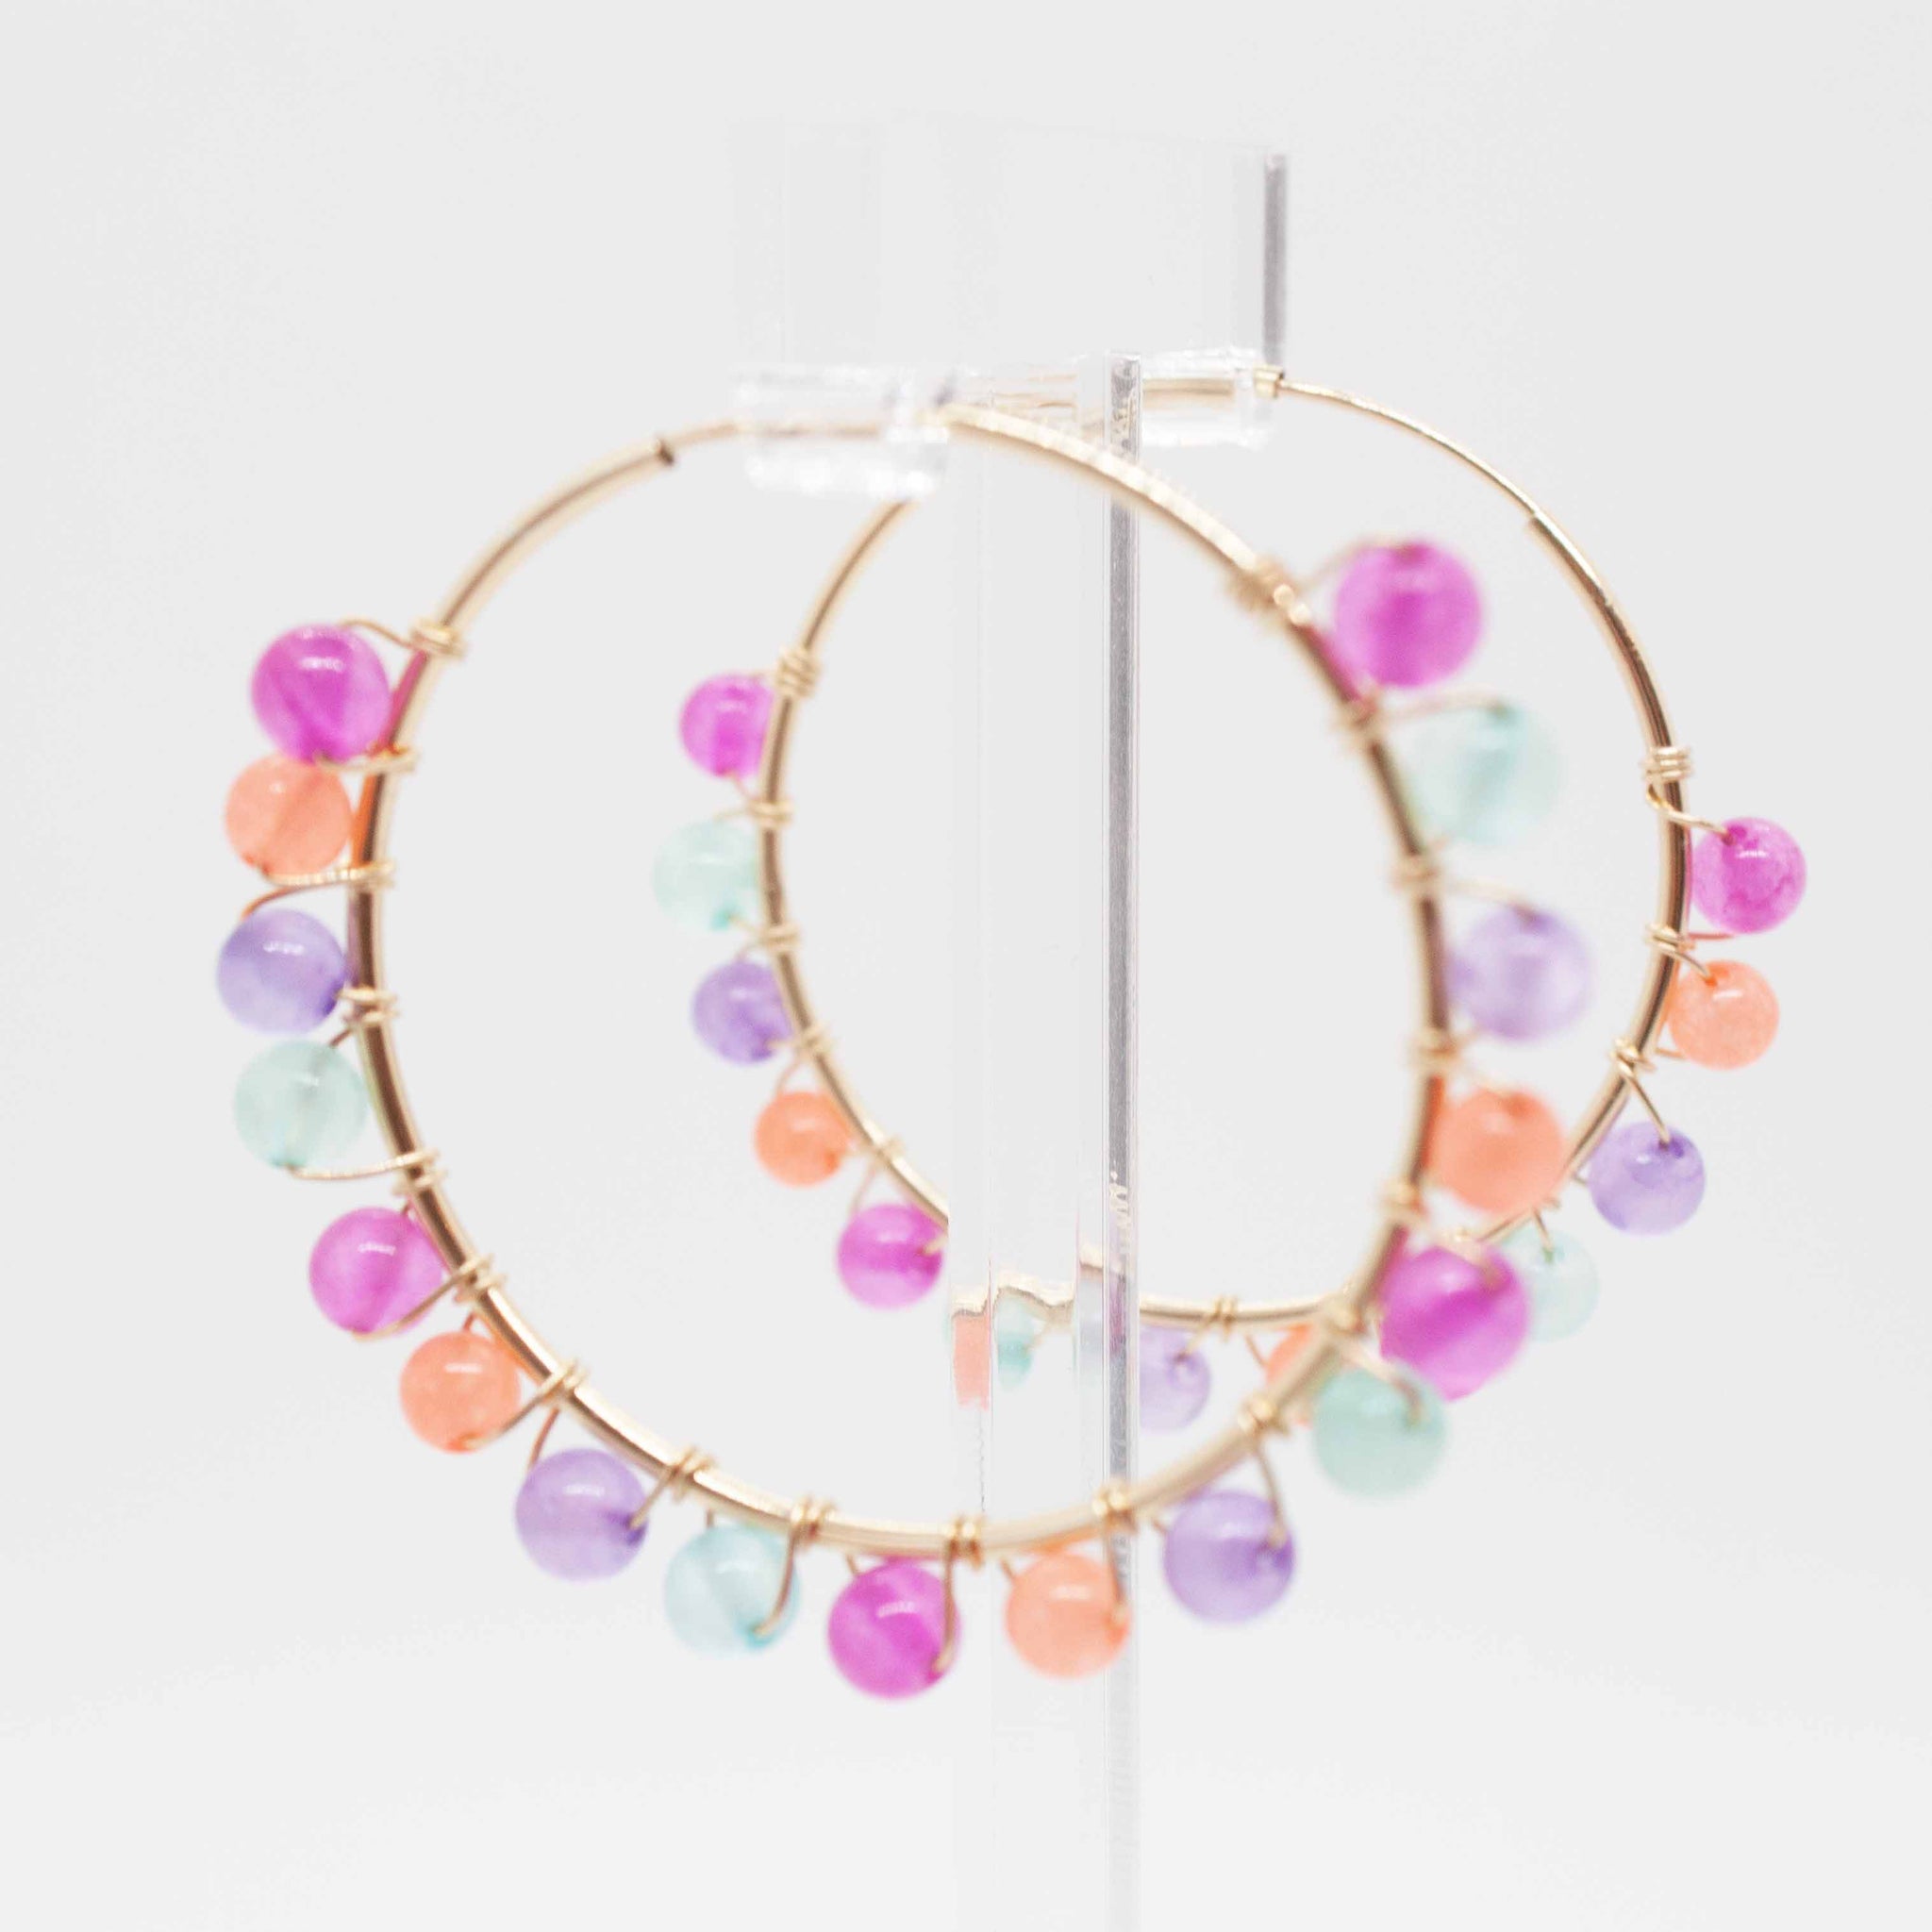 Bodacious ear candy to crank up your Zoom calls this summer! 40mm gold filled hoop earrings and fuschia, tangerine, violet and aqua beads wrapped with gold wire. Handmade in Toronto by kp jewelry co.